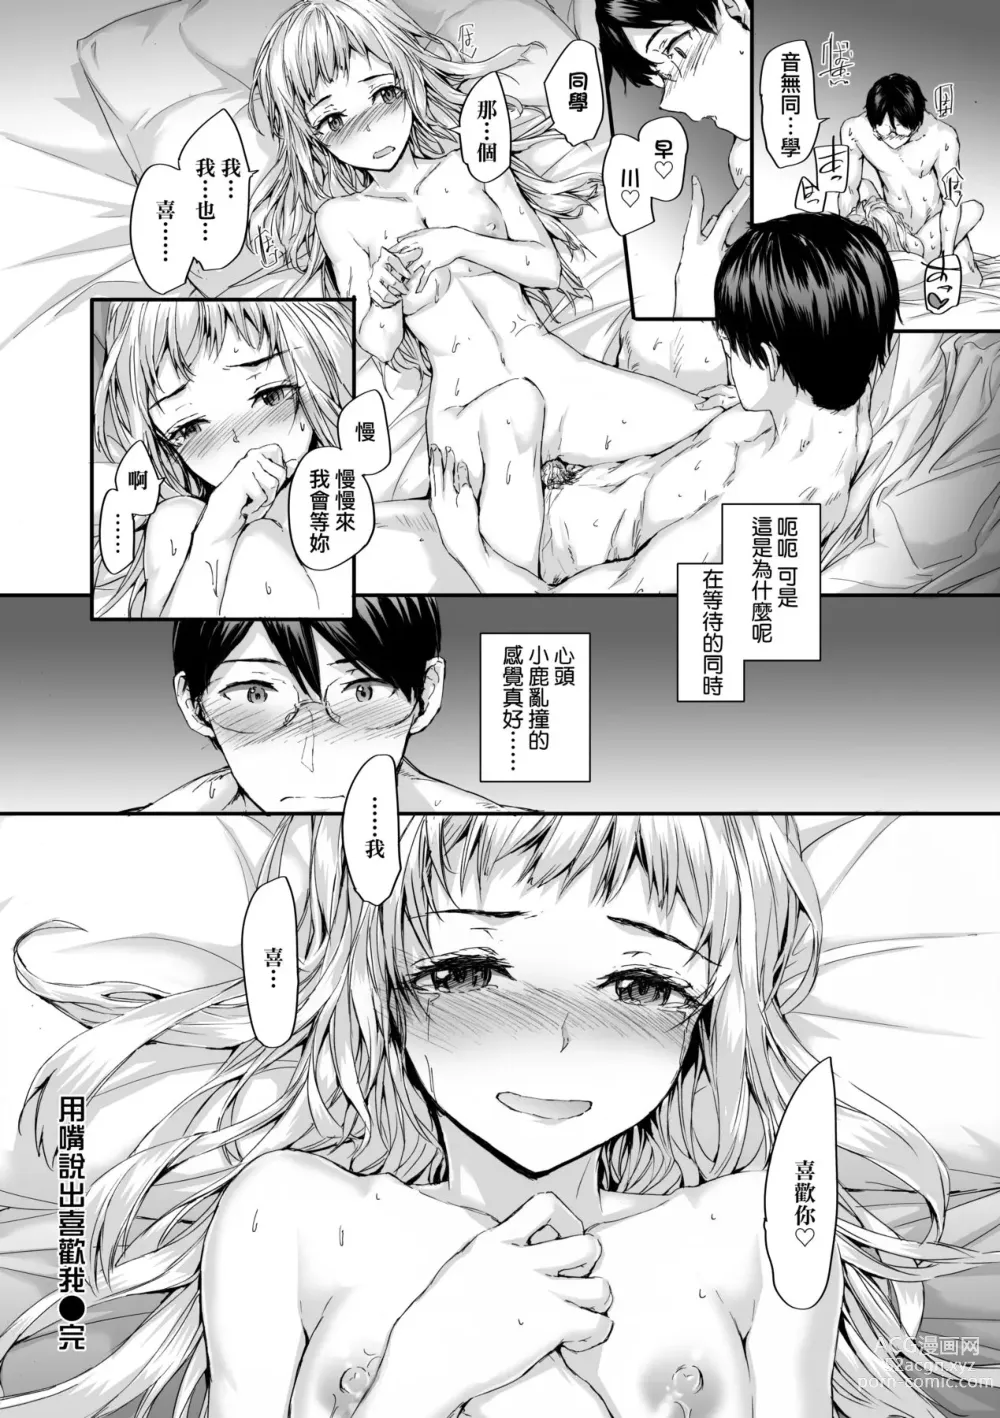 Page 22 of doujinshi Say you love me with your mouth